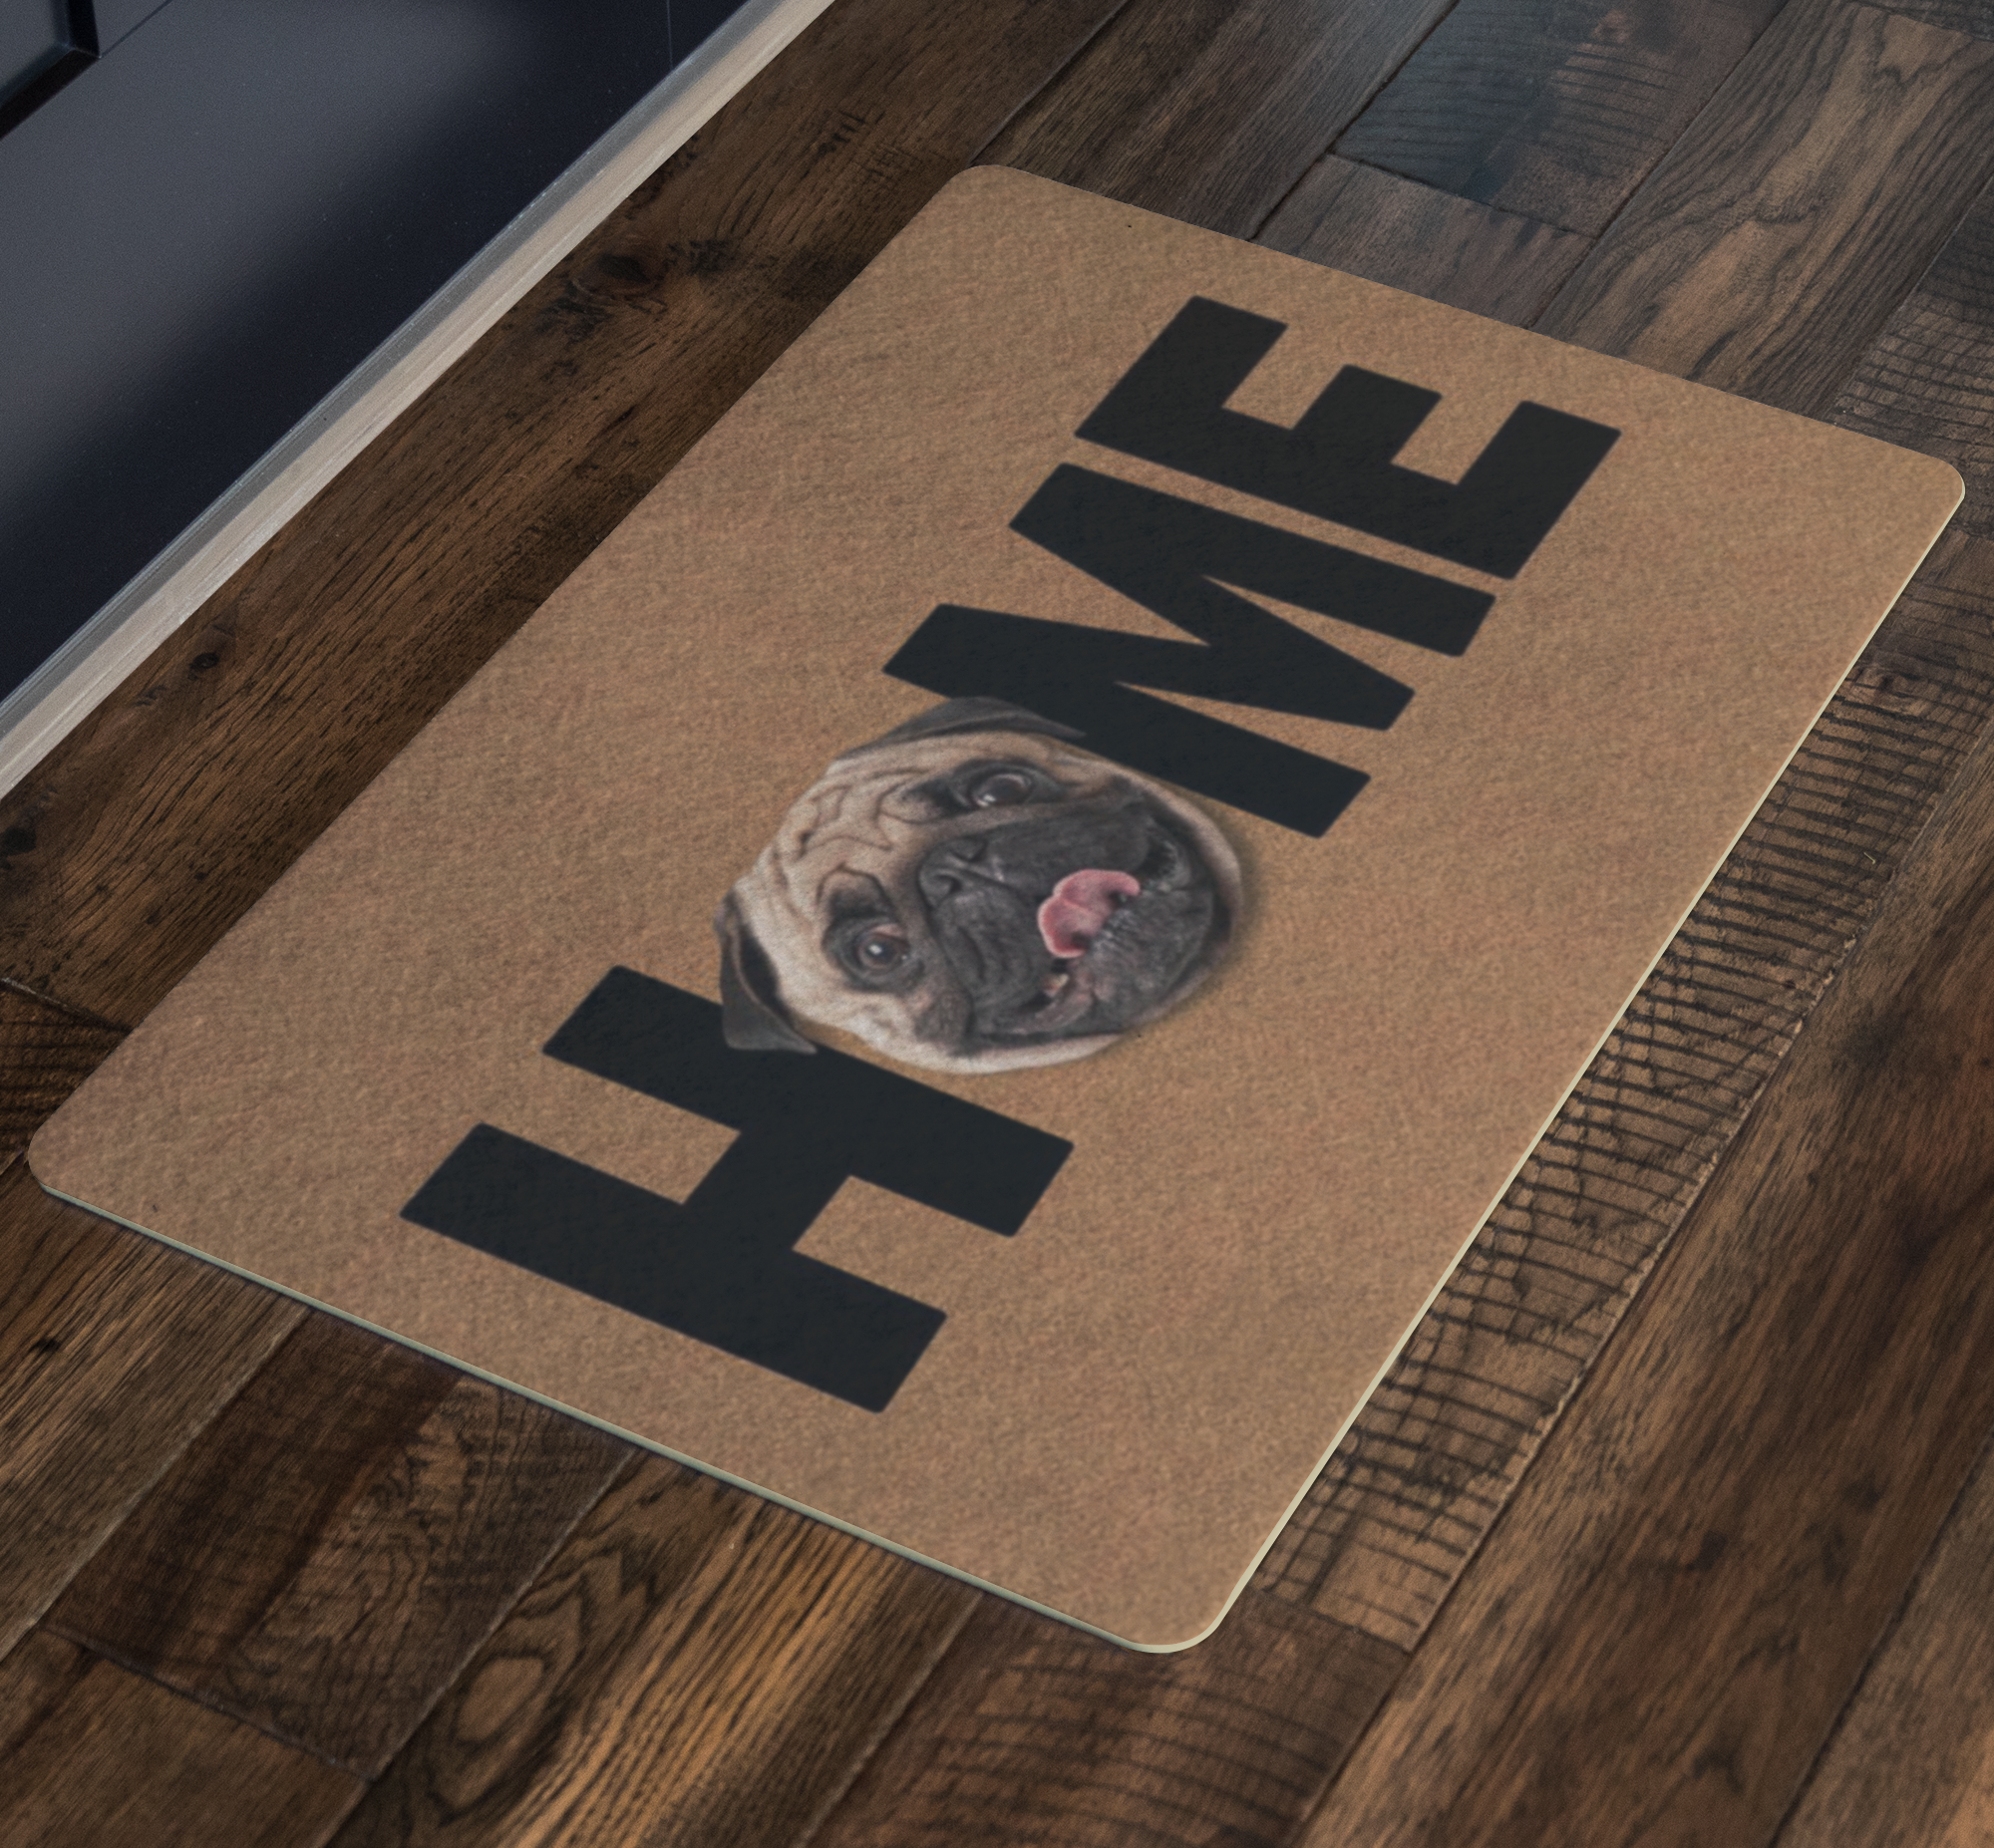 Custom Photo Welcome To Our Home Dog Doormat K228 HN590